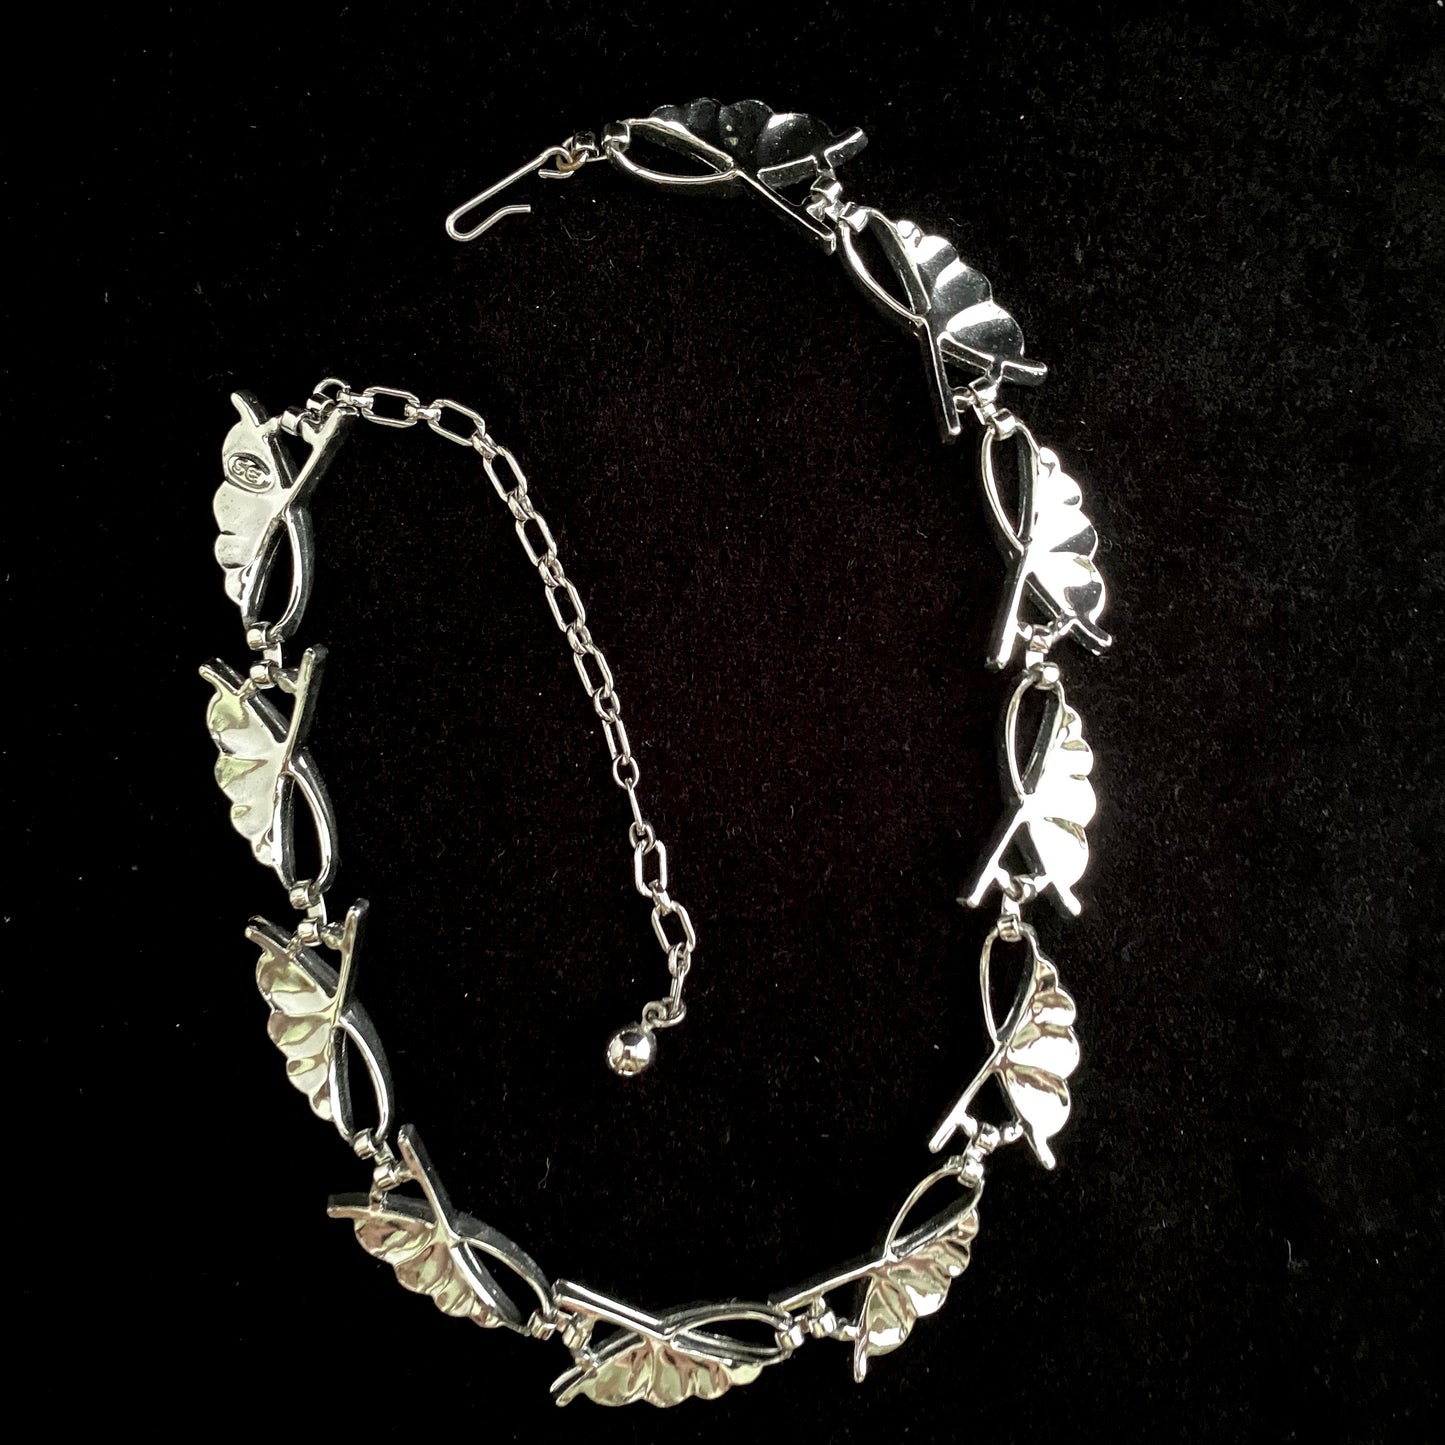 1957 Sarah Coventry Chic Collection Necklace & Earrings